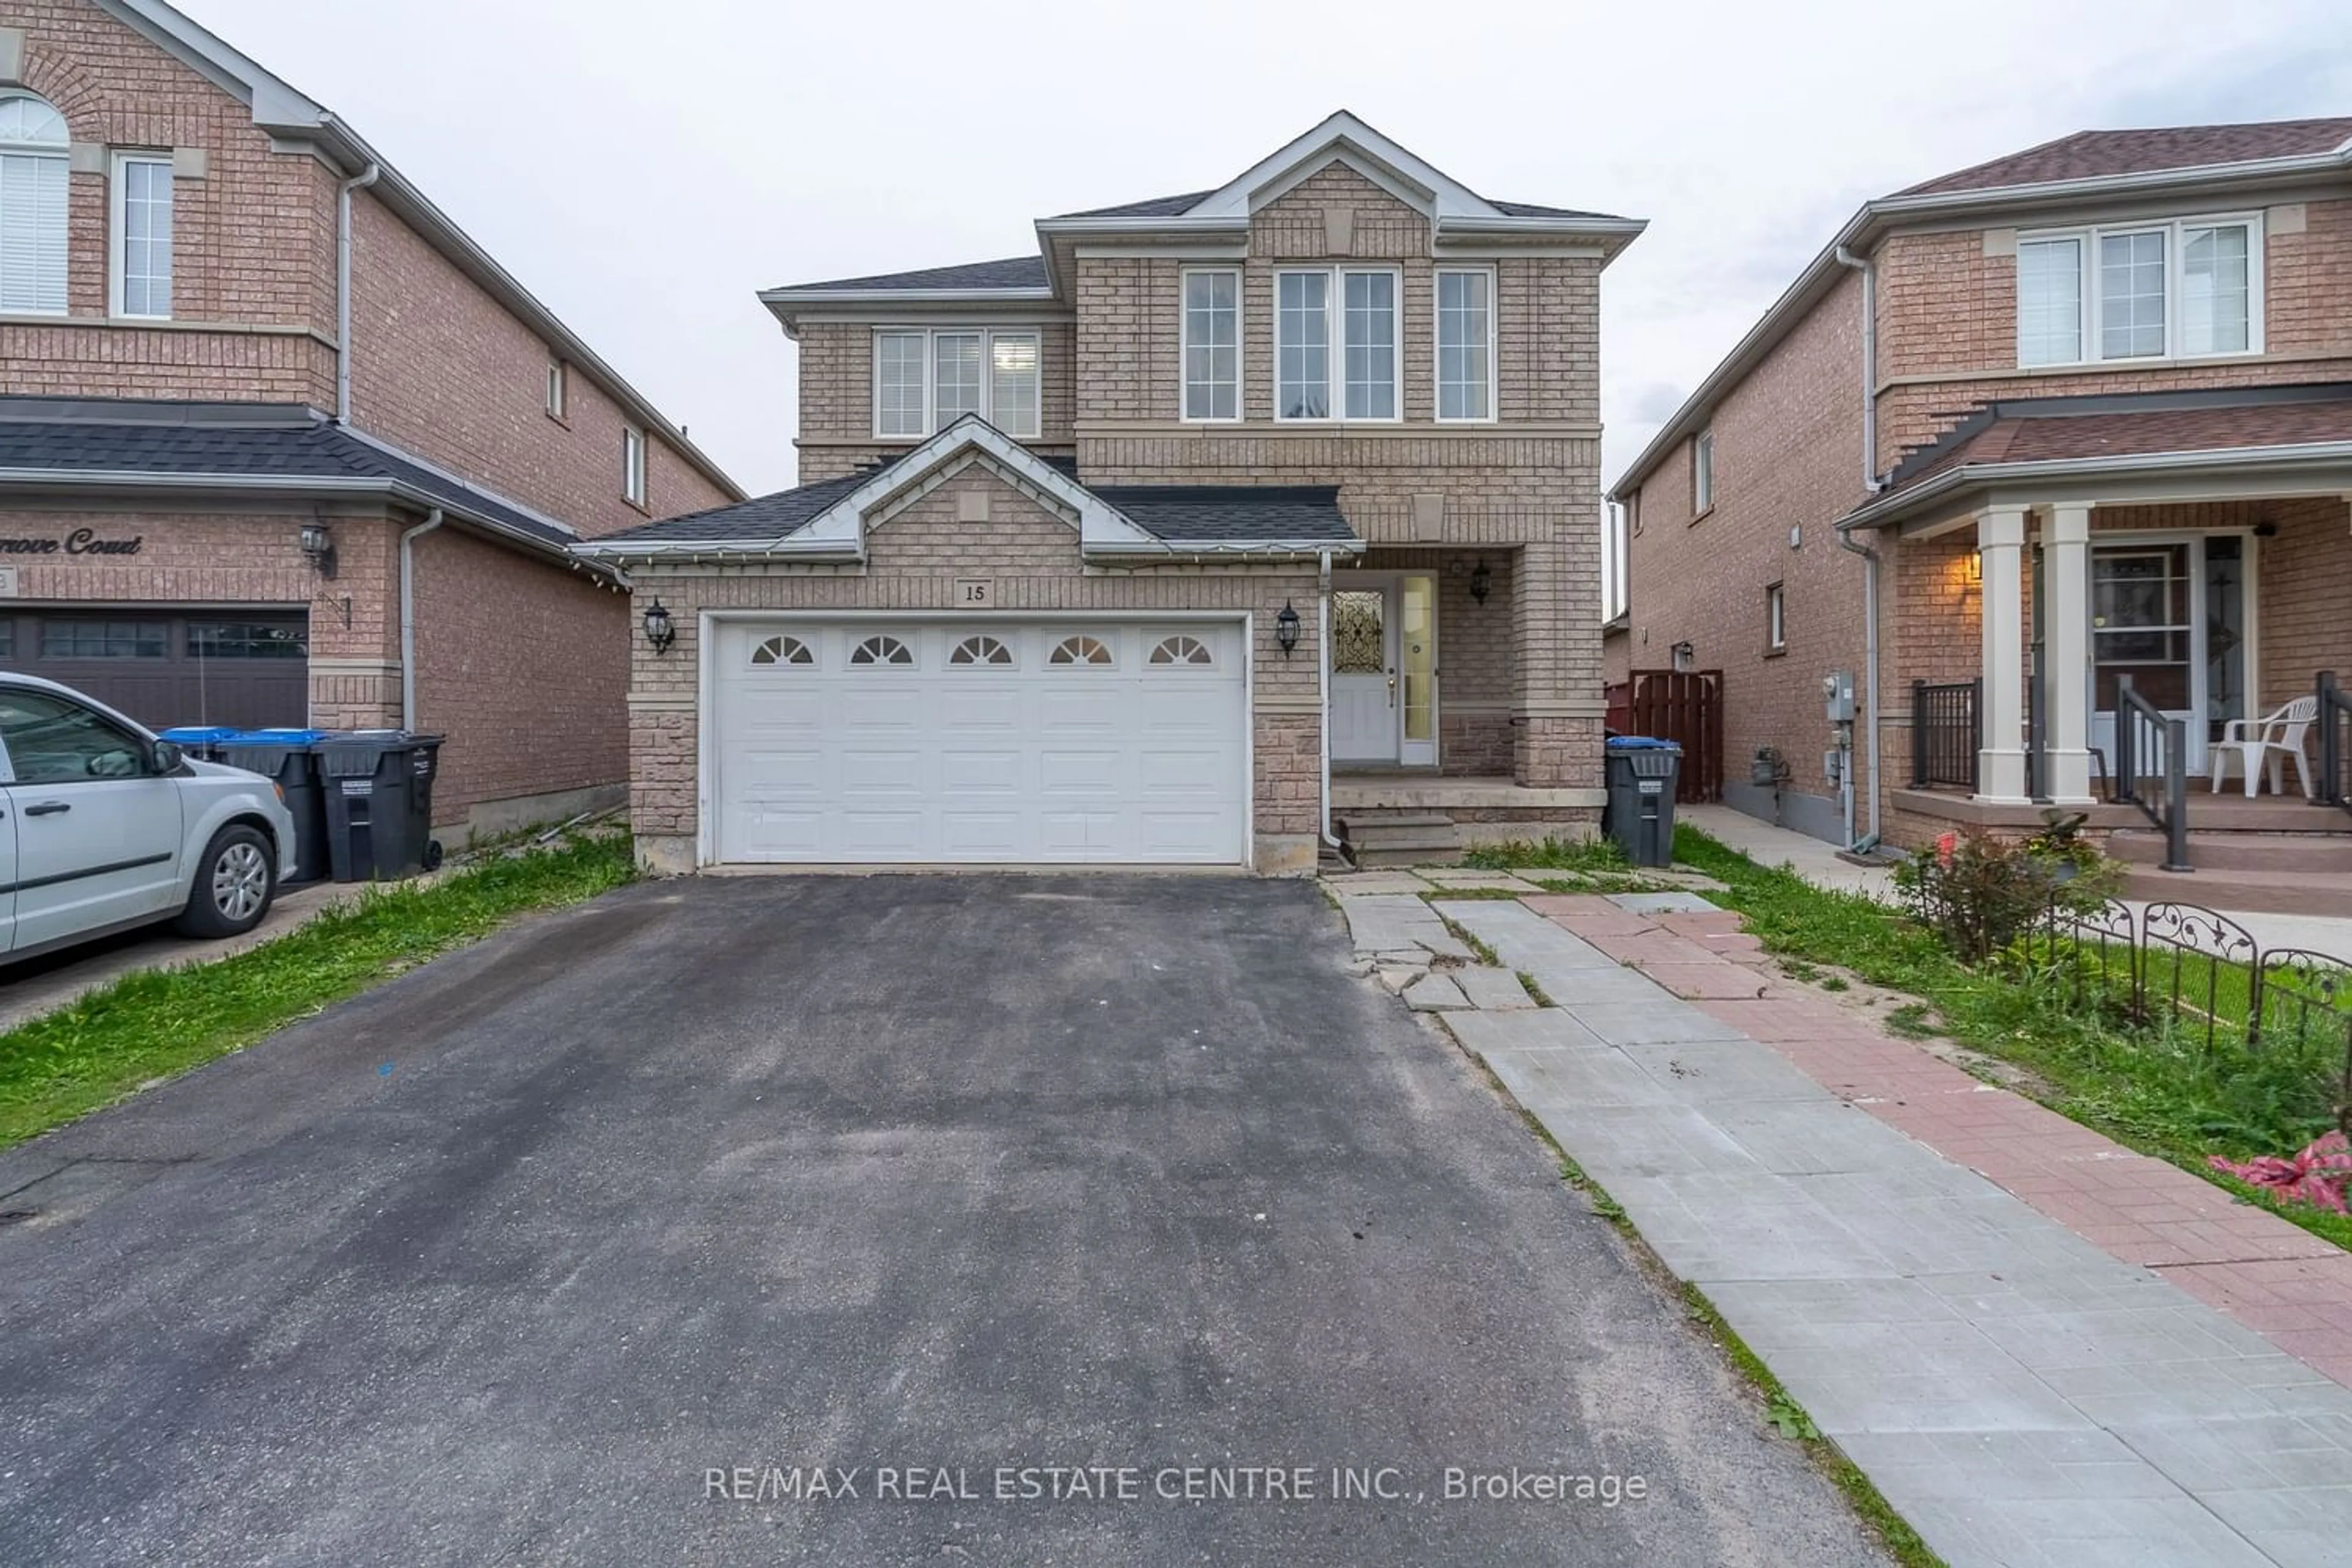 Frontside or backside of a home for 15 Applegrove Crt, Brampton Ontario L6R 2Y9